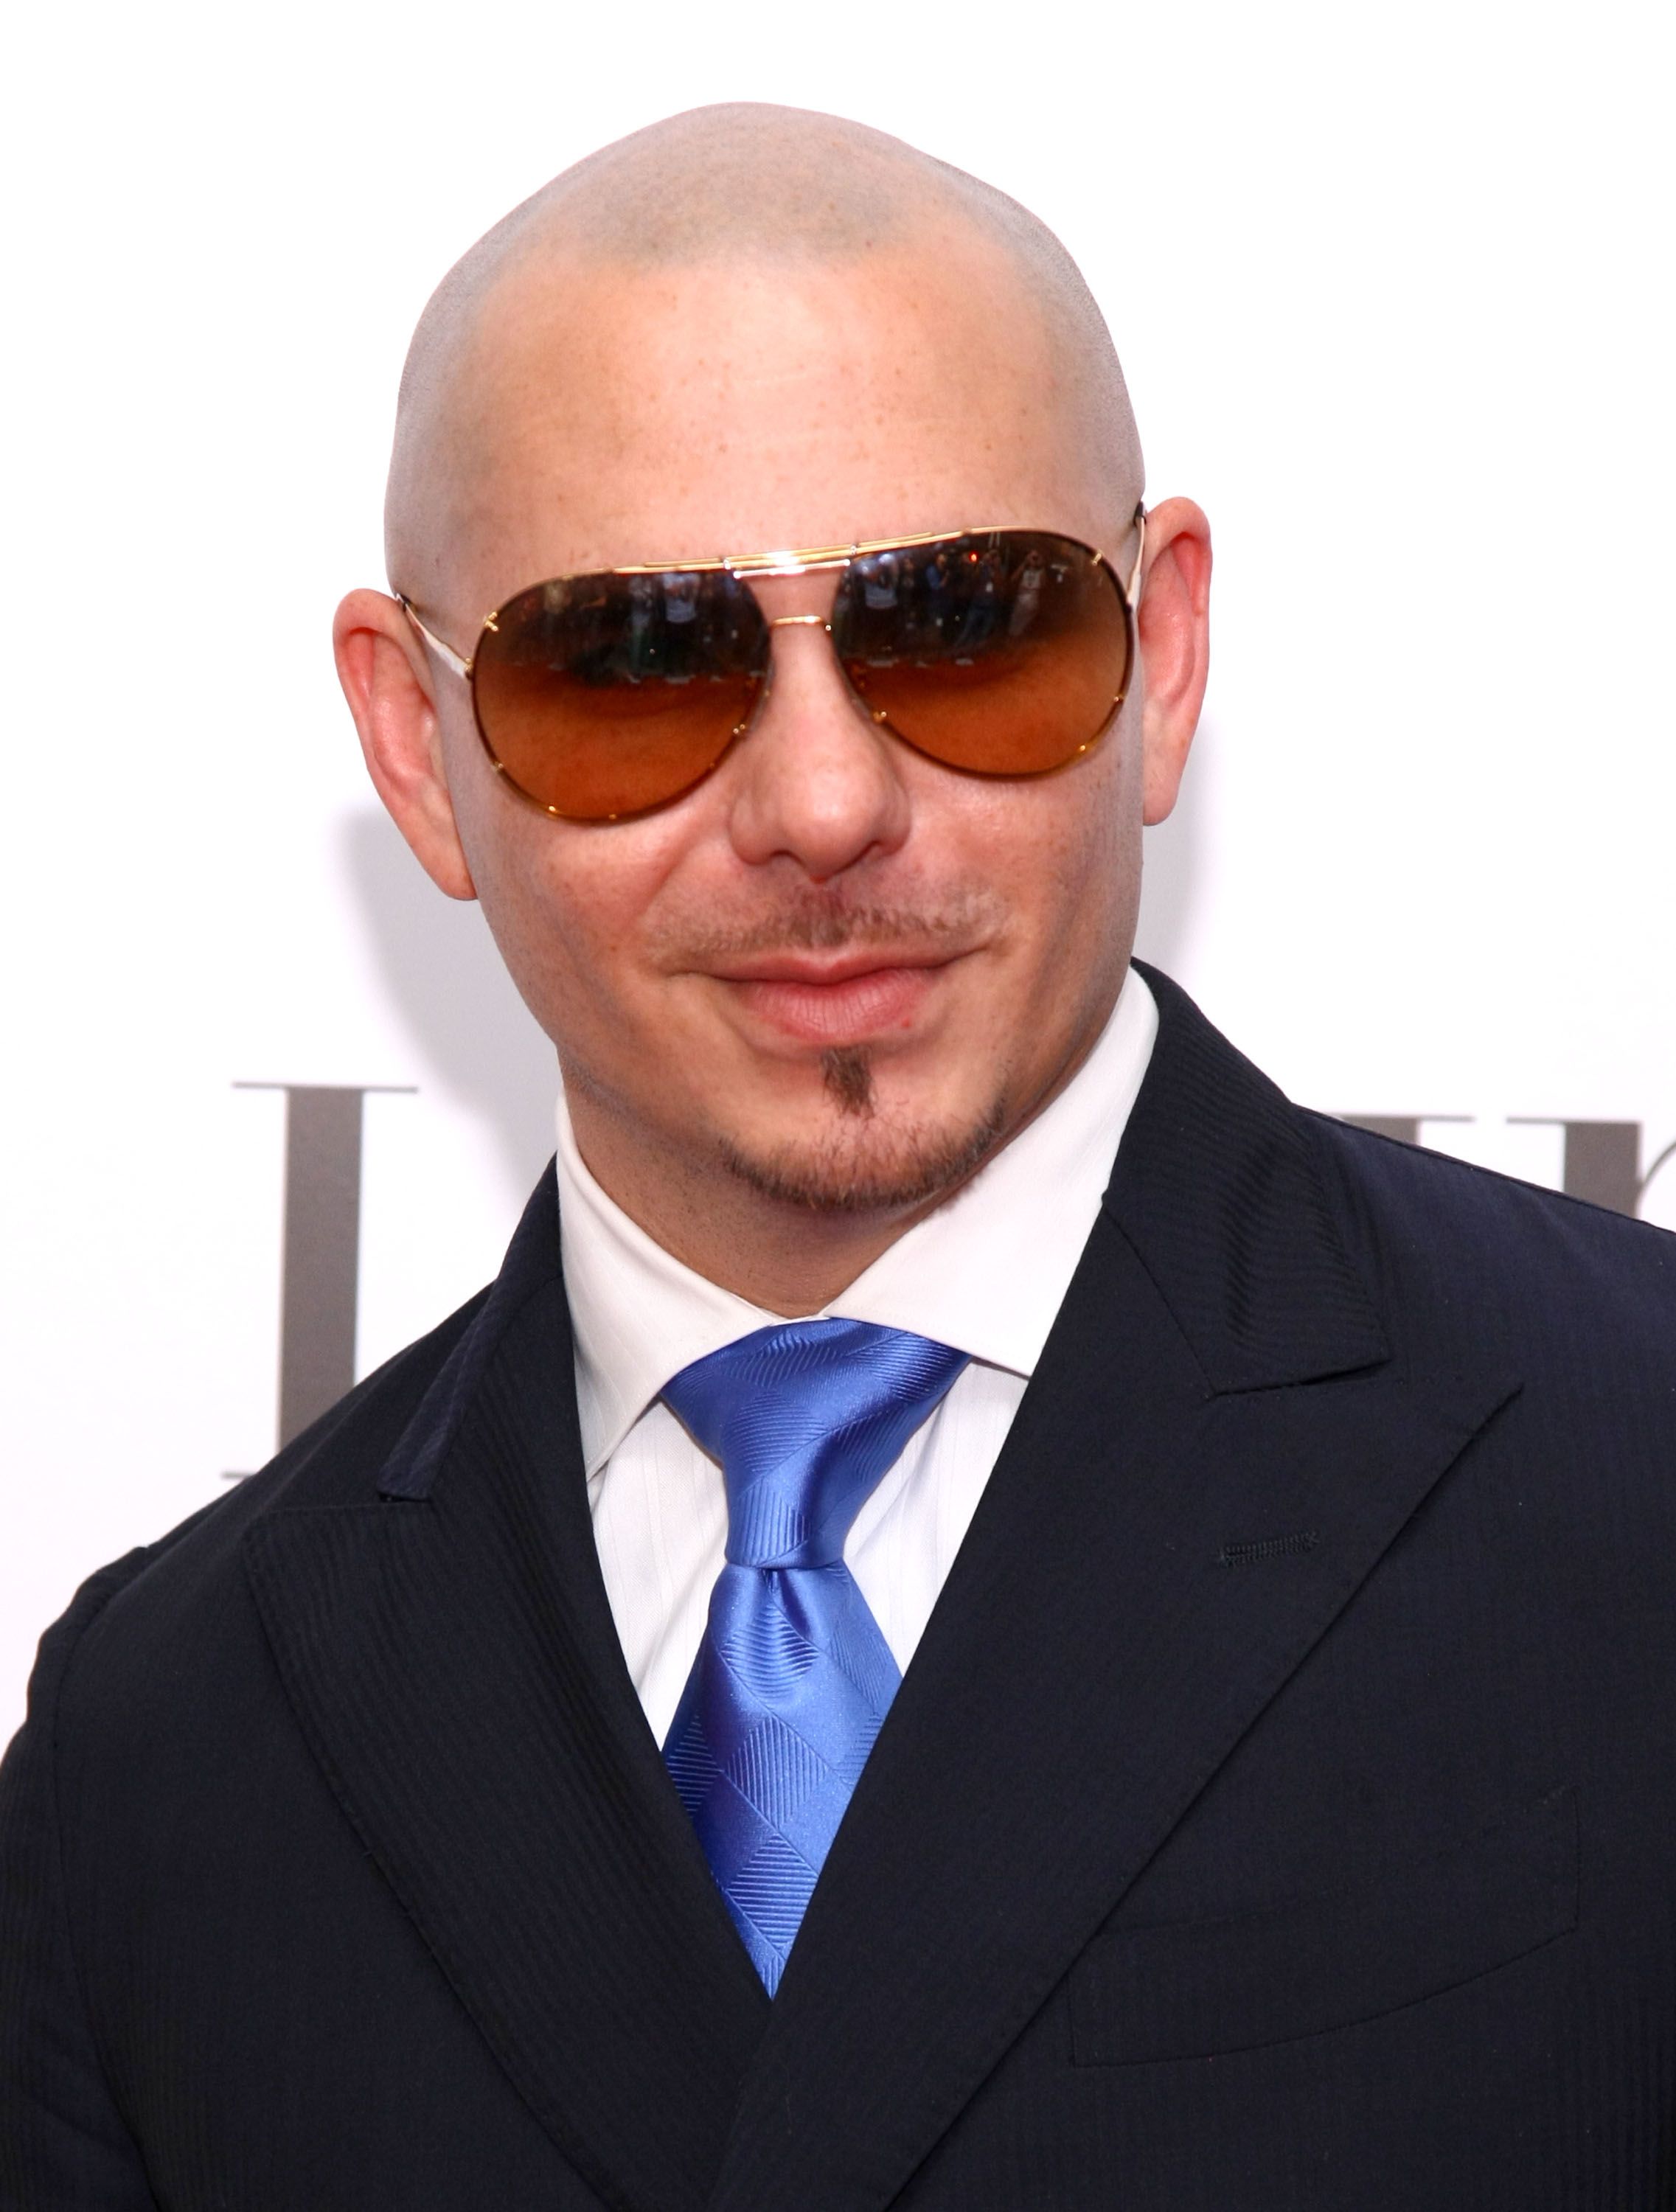 pitbull the singer and his wife